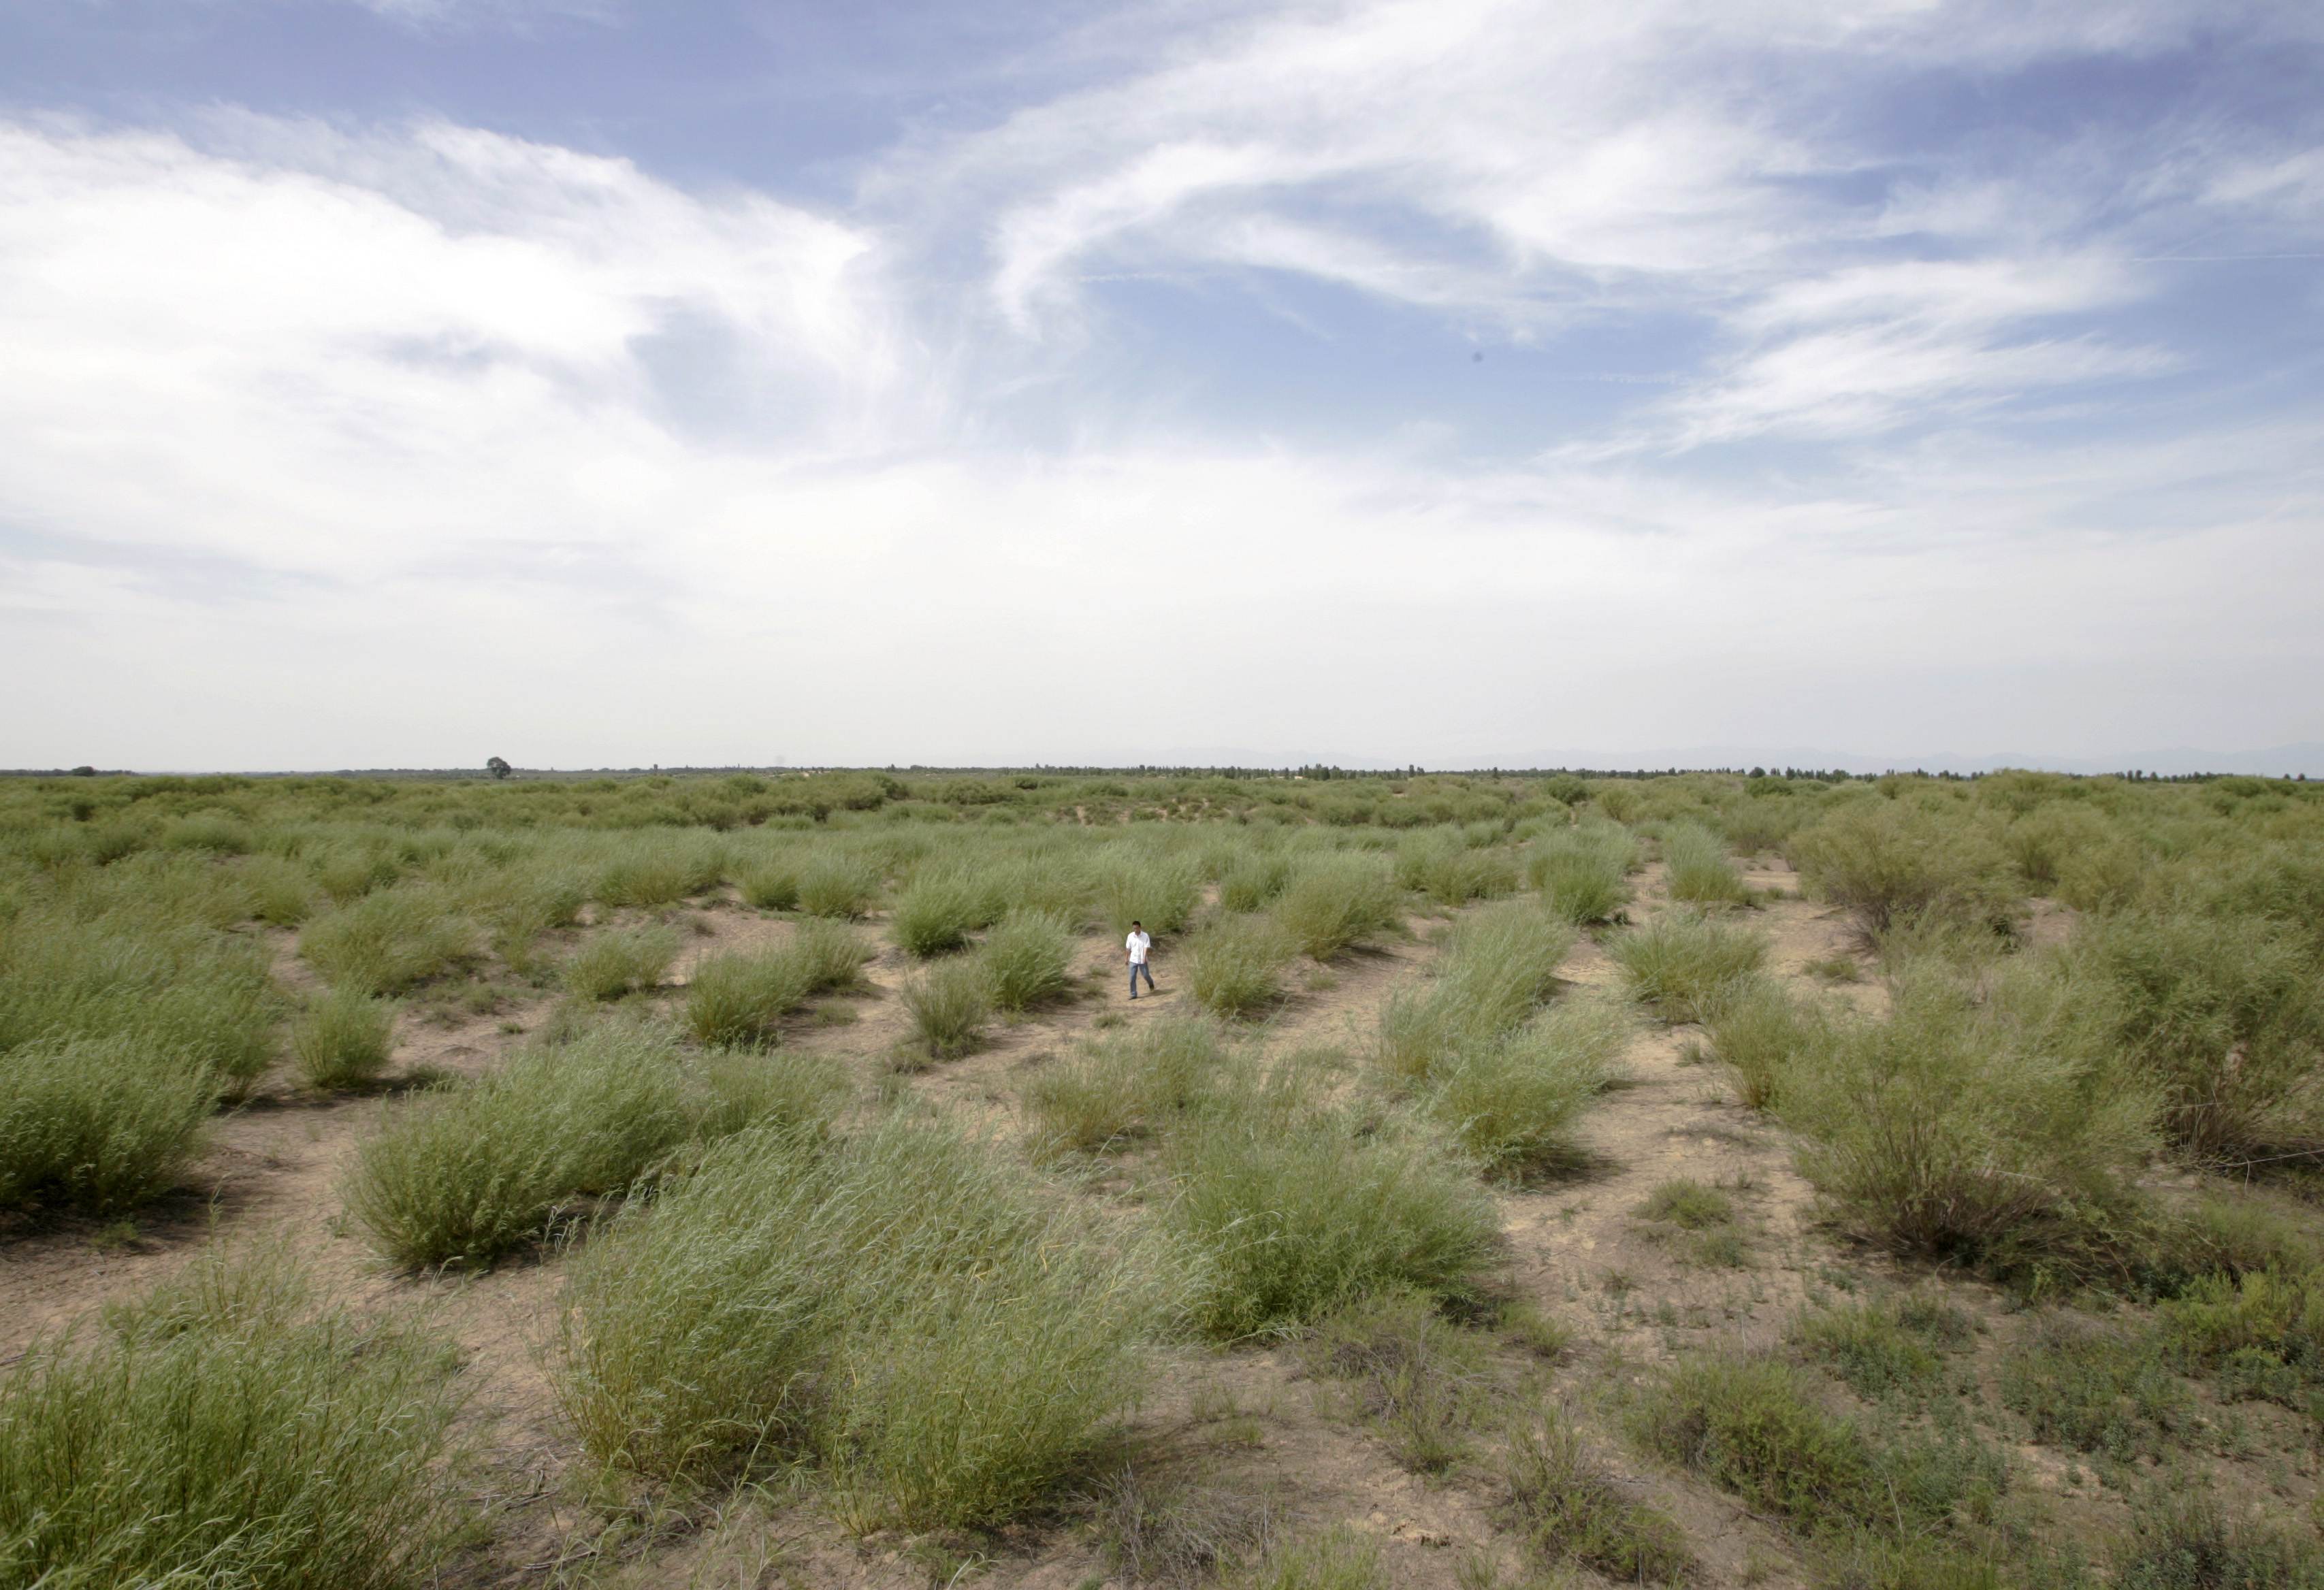 A file photo shows the transformation of the Kubuqi Desert on the outskirts of Dalate county in north China's Inner Mongolia Autonomous Region on July 11, 2007. (Jason Lee—REUTERS)